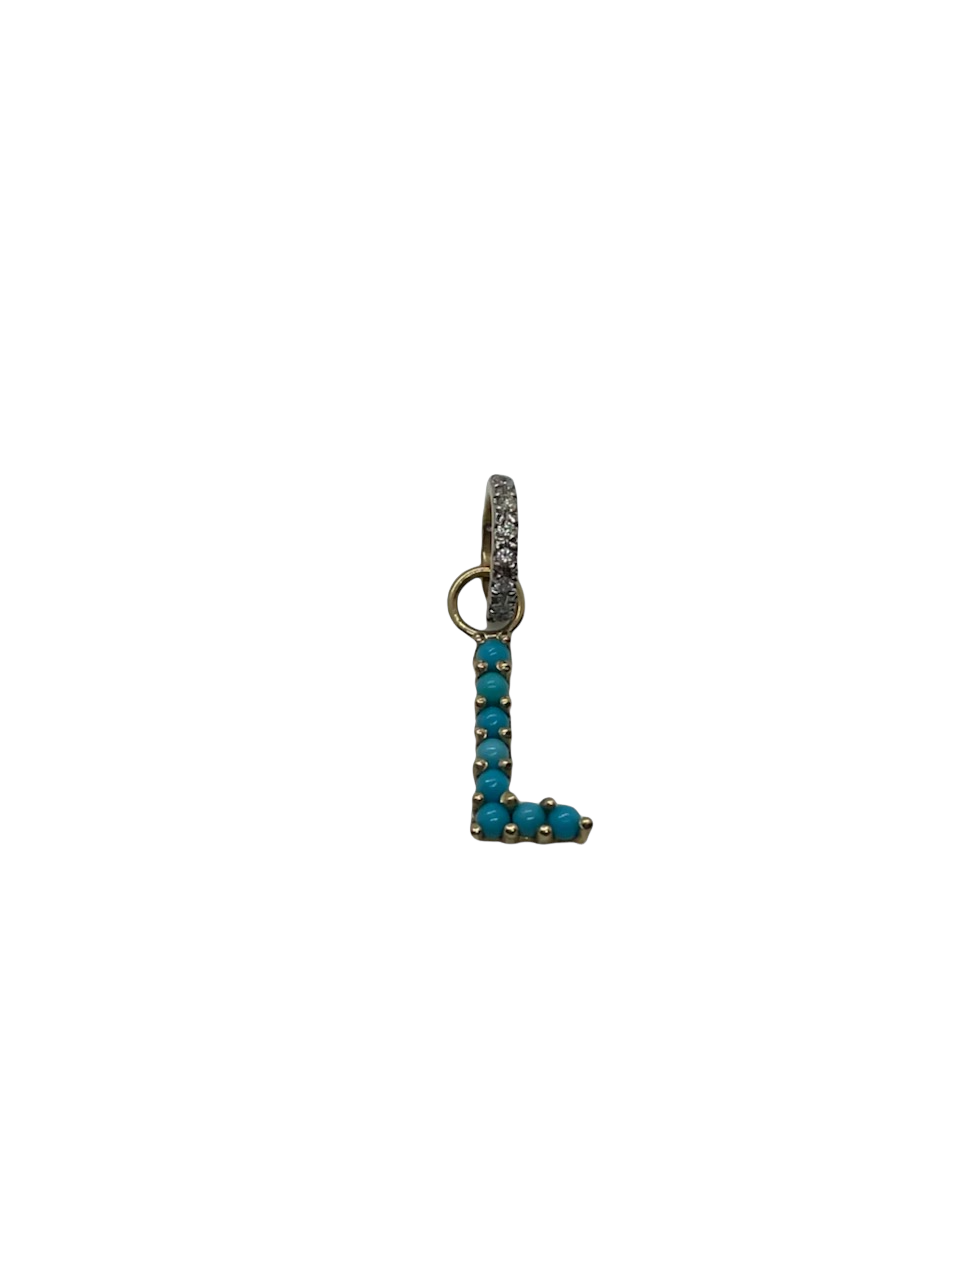 Turquoise L with pave diamond jumpring set in 14k Yellow Gold